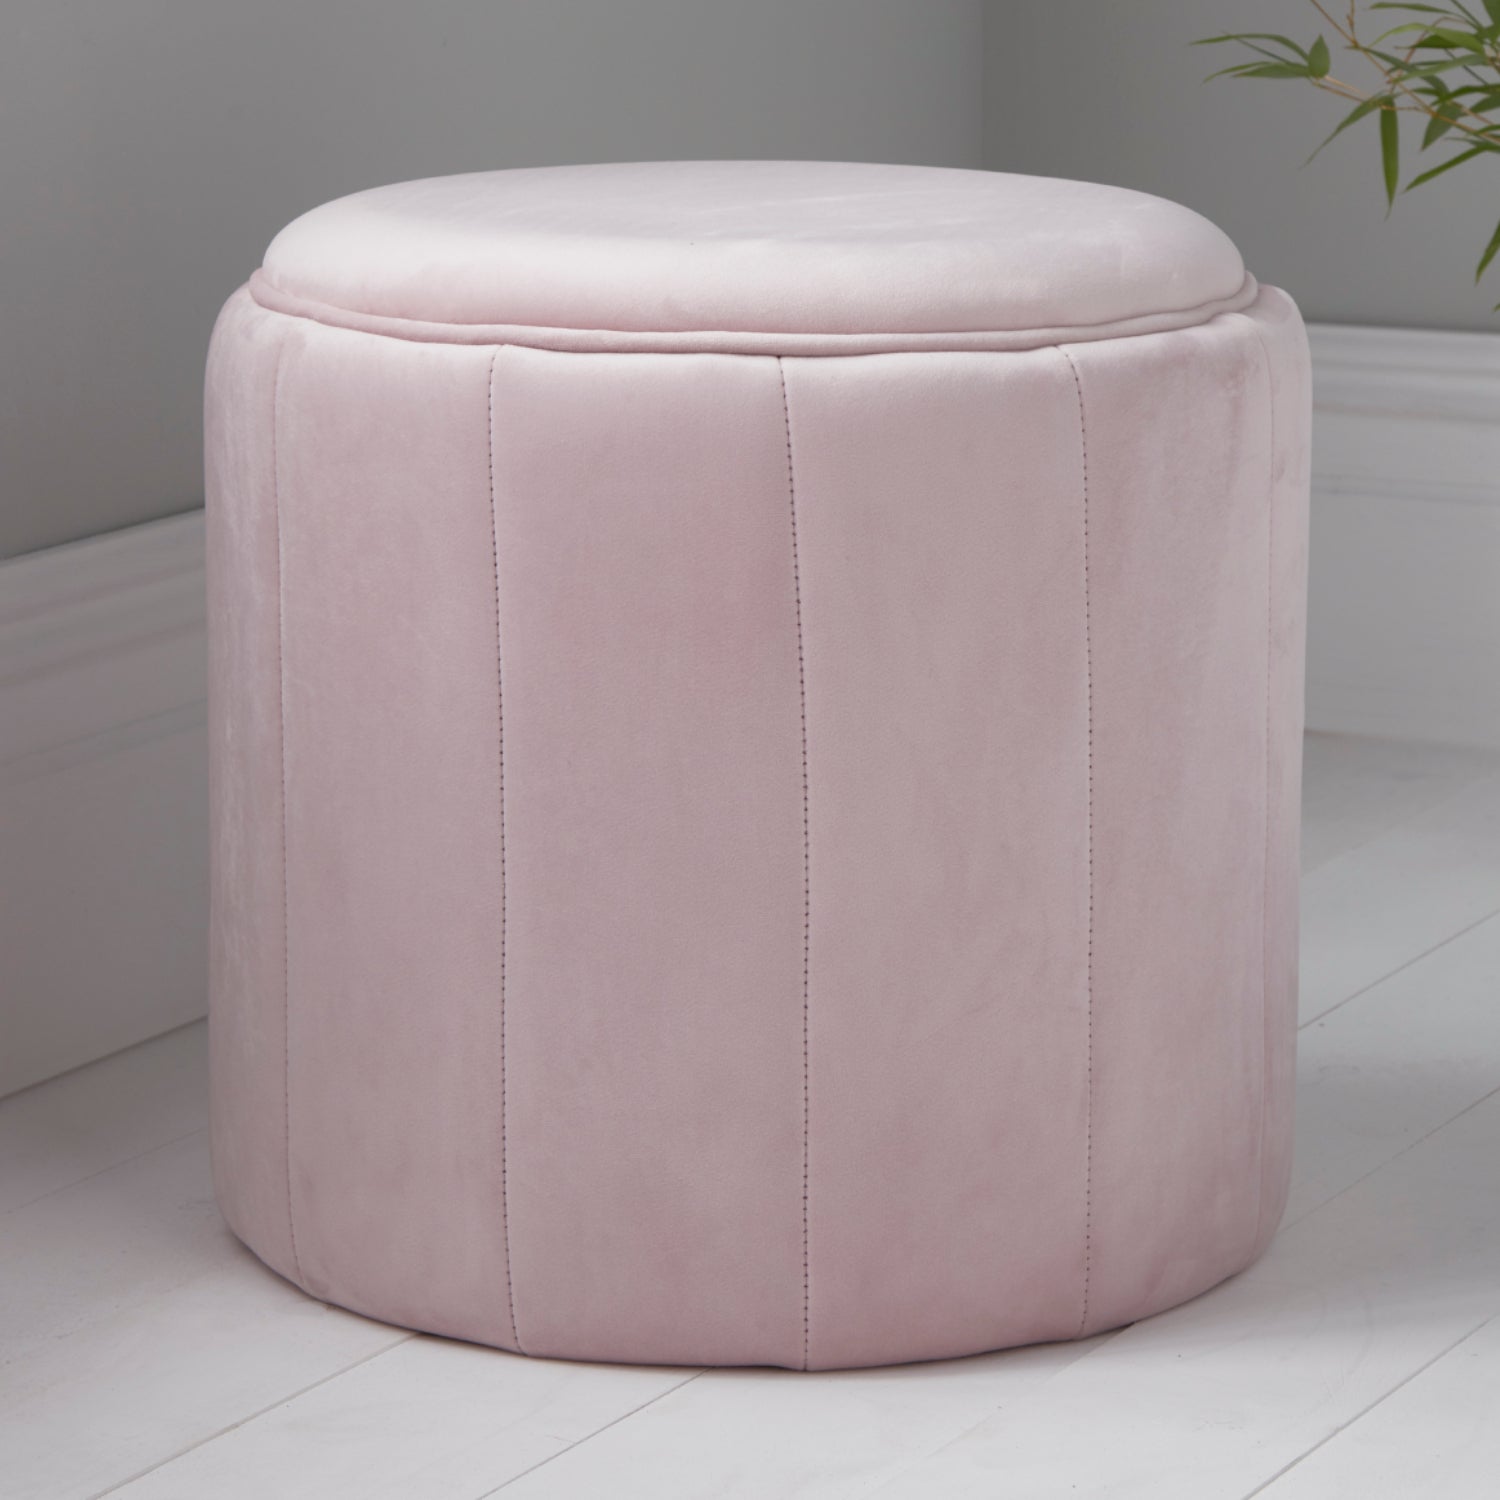 POUFS AND STOOLS IN STOCK